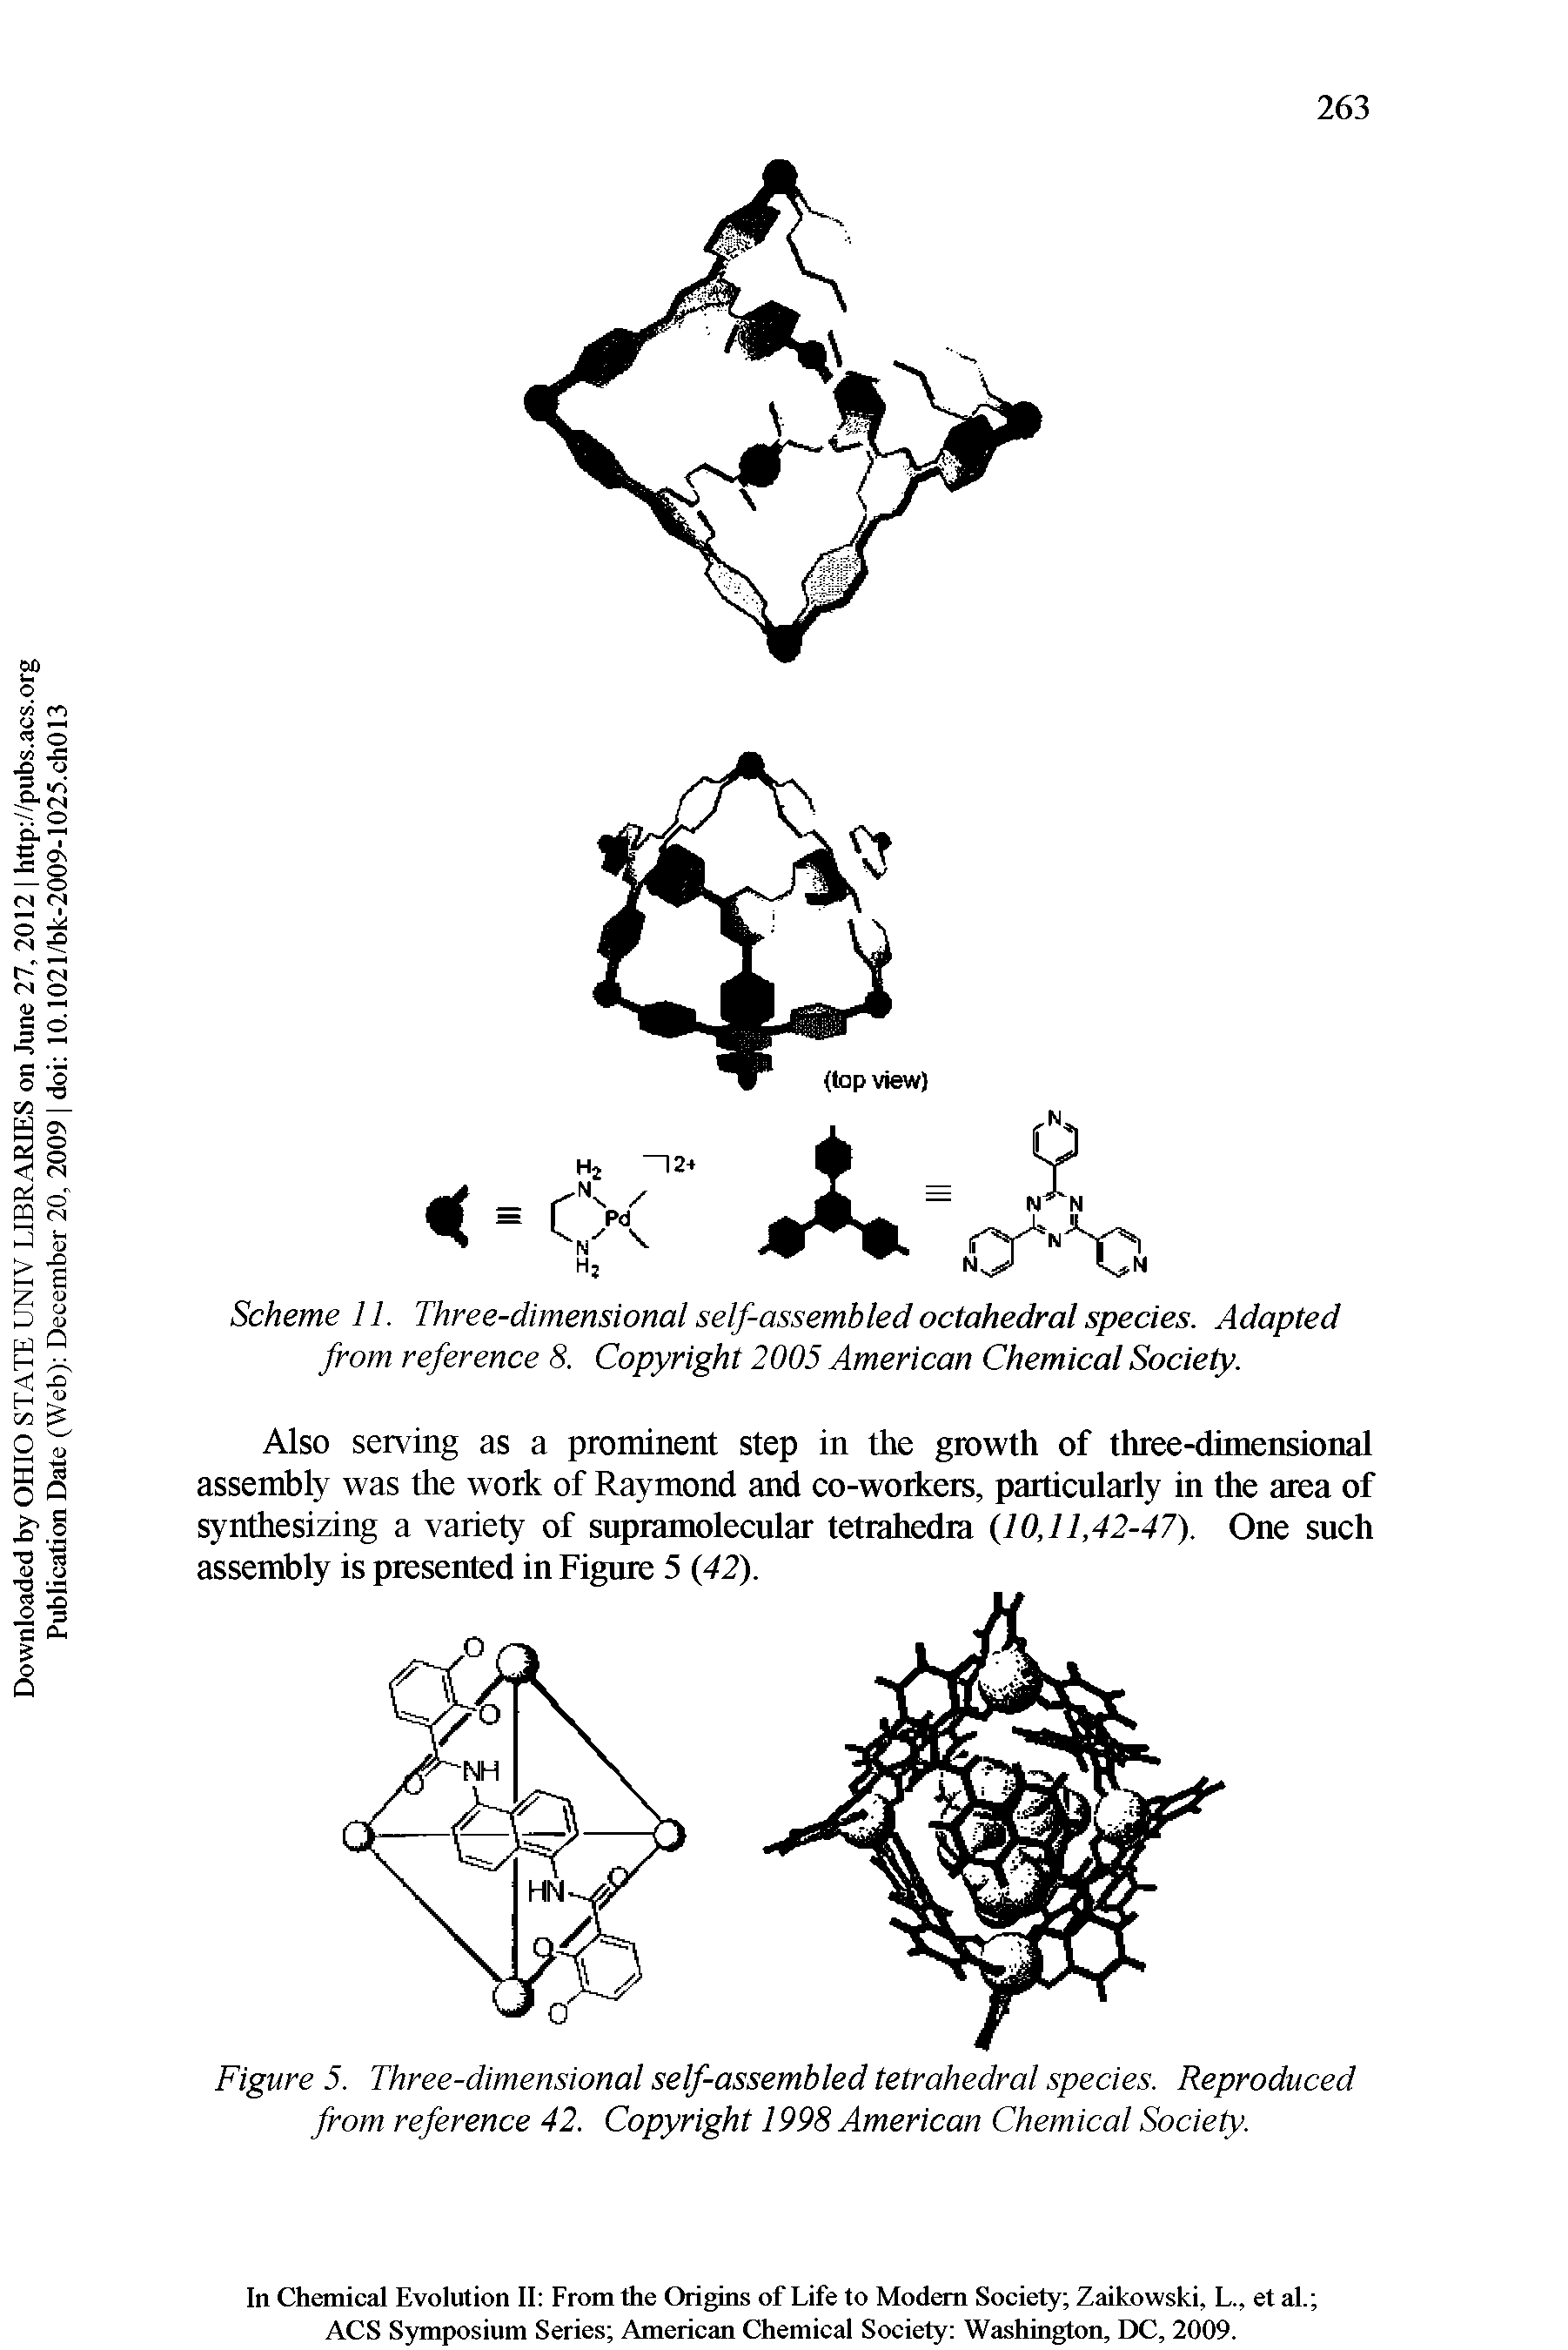 Scheme 11. Three-dimensional self-assembled octahedral species. Adapted from reference 8. Copyright 2005 American Chemical Society.